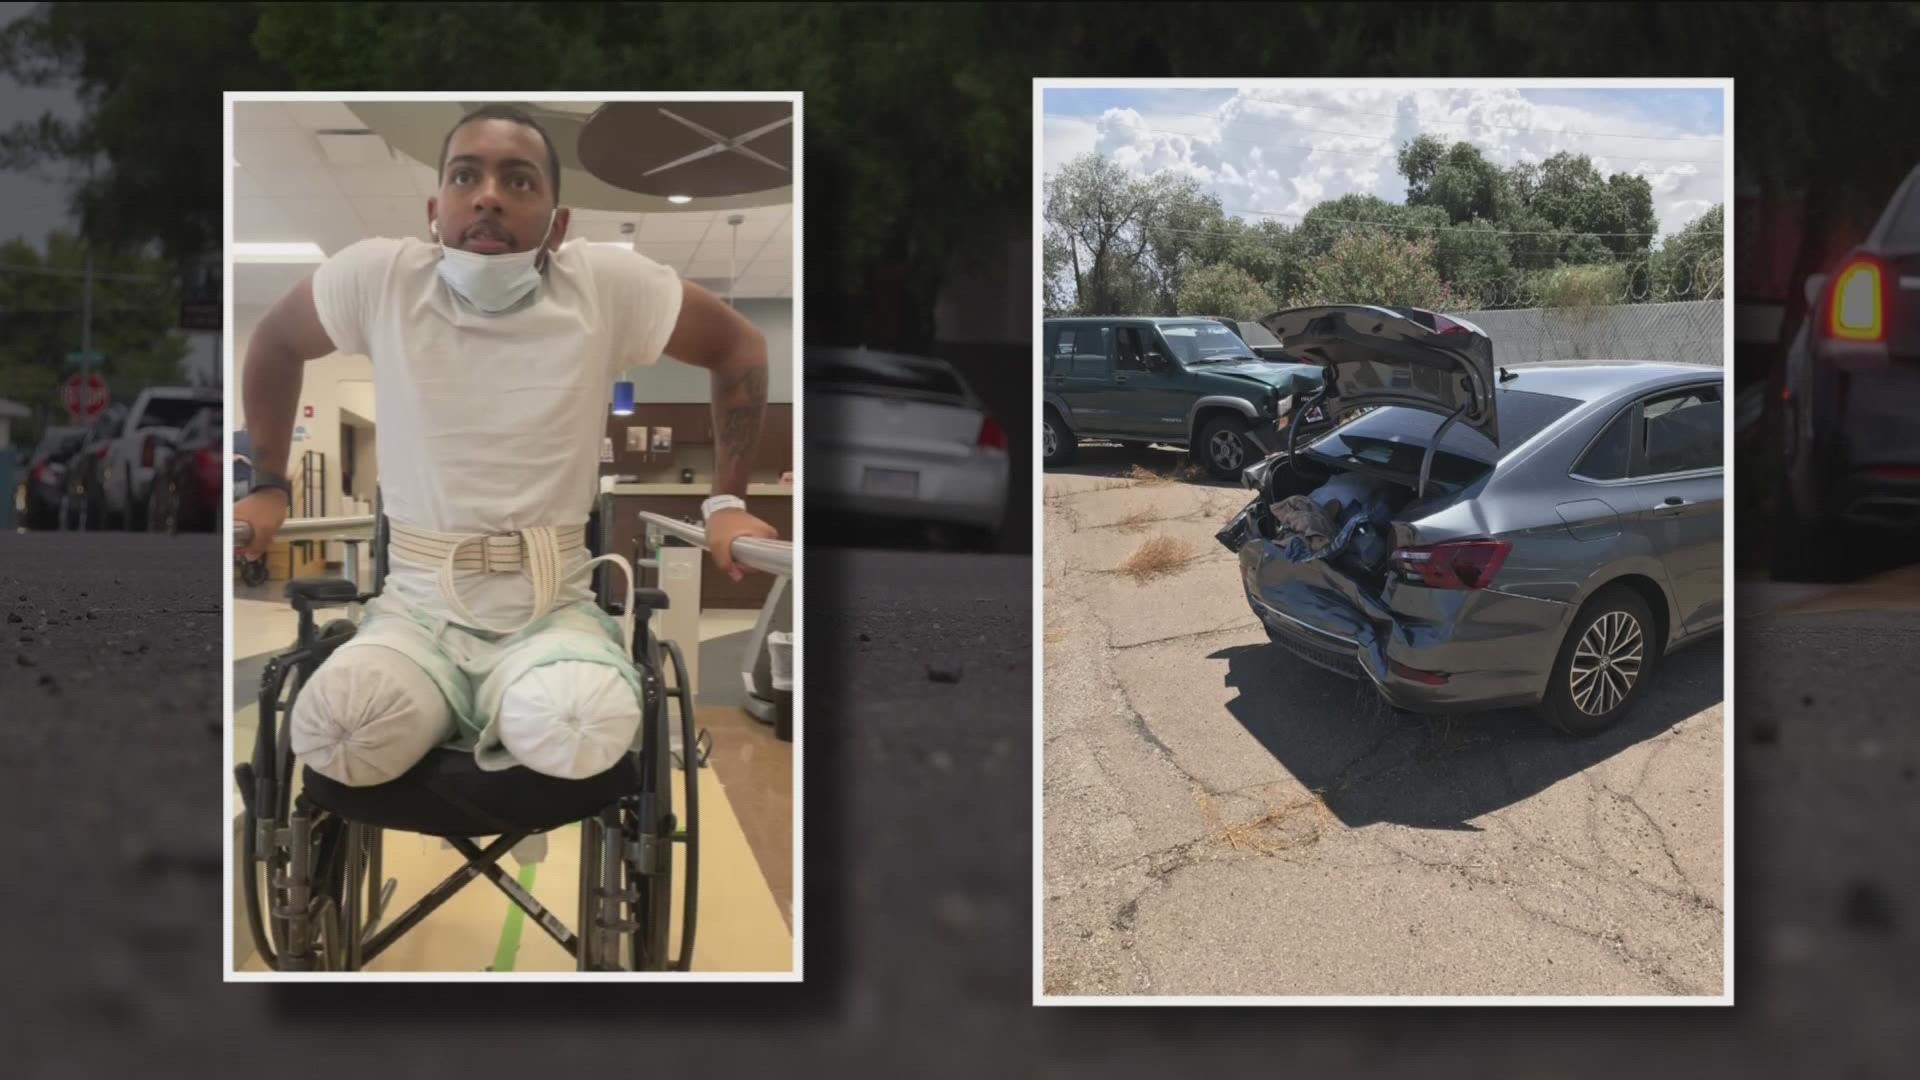 A Valley family is seeking justice after a suspected drunk driver hit a 23-year-old man, crushing both of his legs that had to be amputated.